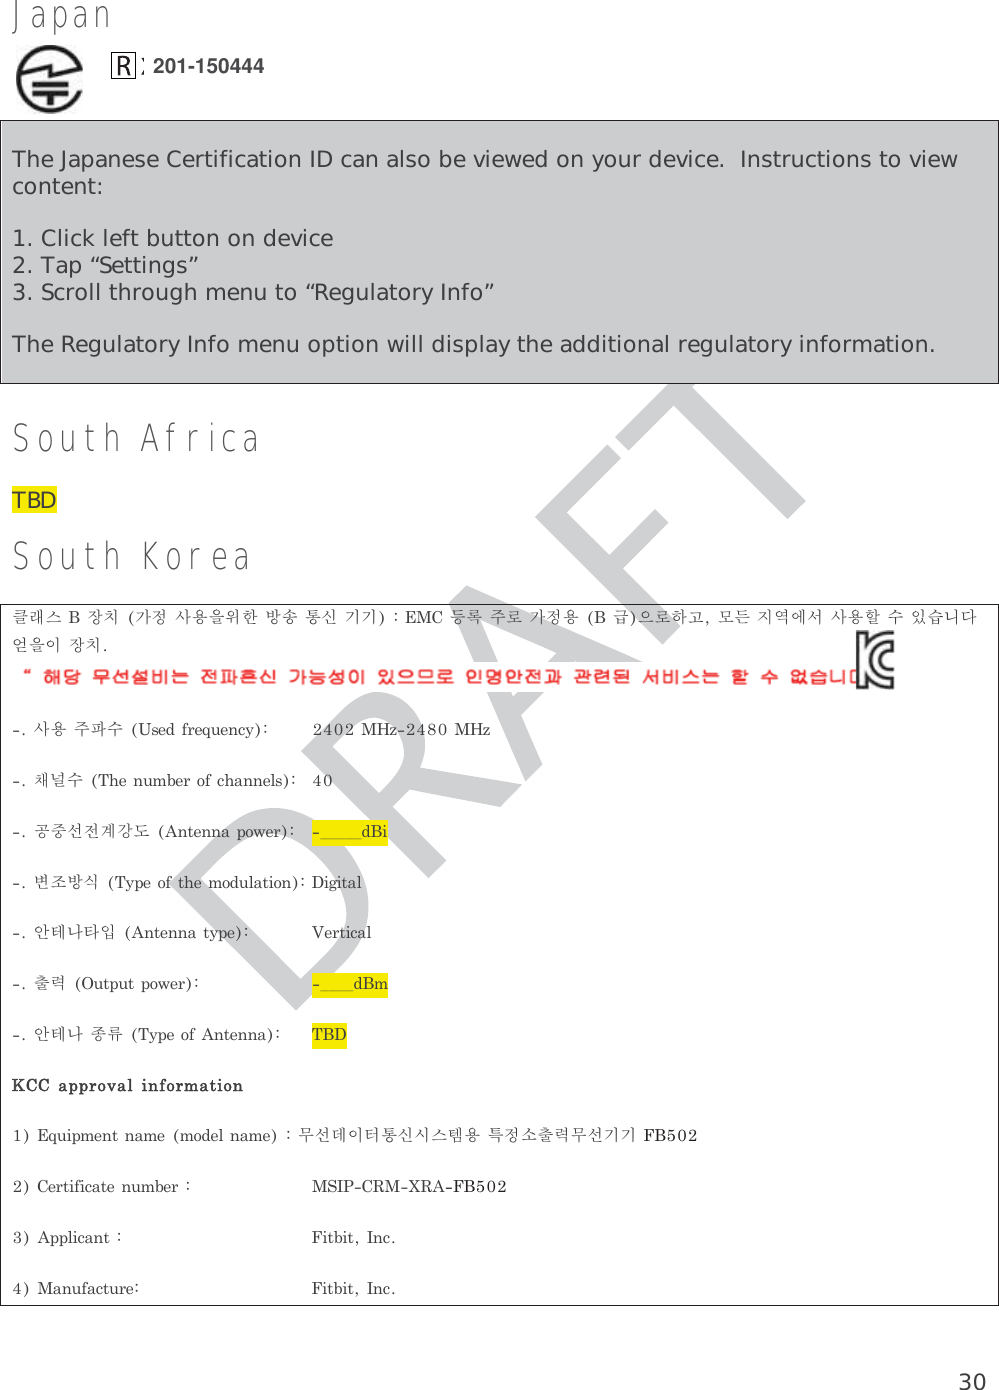 30Japan  The Japanese Certification ID can also be viewed on your device.  Instructions to view content: 1. Click left button on device 2. Tap “Settings” 3. Scroll through menu to “Regulatory Info” The Regulatory Info menu option will display the additional regulatory information. South Africa TBD South Korea sIXhr:jRadb|PVx\@@HLmK:ja?cK{=NGo`_SRa}WgYCD^dehrRa mzW 3&apos;&amp;(2&apos;15&apos;.%8 99pBW*&apos;.5-$&apos;2/(%*#..&apos;,3 &gt;nTi&lt;;F.4&apos;..#0/7&apos;2 &quot;&quot;&quot;&quot;&quot;&amp;+QkP[80&apos;/(4*&apos;-/&amp;5,#4+/.+)+4#,]vAtf.4&apos;..#480&apos;  &apos;24+%#,qJ540540/7&apos;2 &quot;&quot;&quot;&quot;&amp;-]vAlM80&apos;/(.4&apos;..# #002/6#,+.(/2-#4+/.15+0-&apos;.4.#-&apos;-/&amp;&apos;,.#-&apos;OTEeux\ZXwayjUqJOT@@&apos;24+(+%#4&apos;.5-$&apos;2 !00,+%#.4 +4$+4.%#.5(#%452&apos; +4$+4.%  201-150444